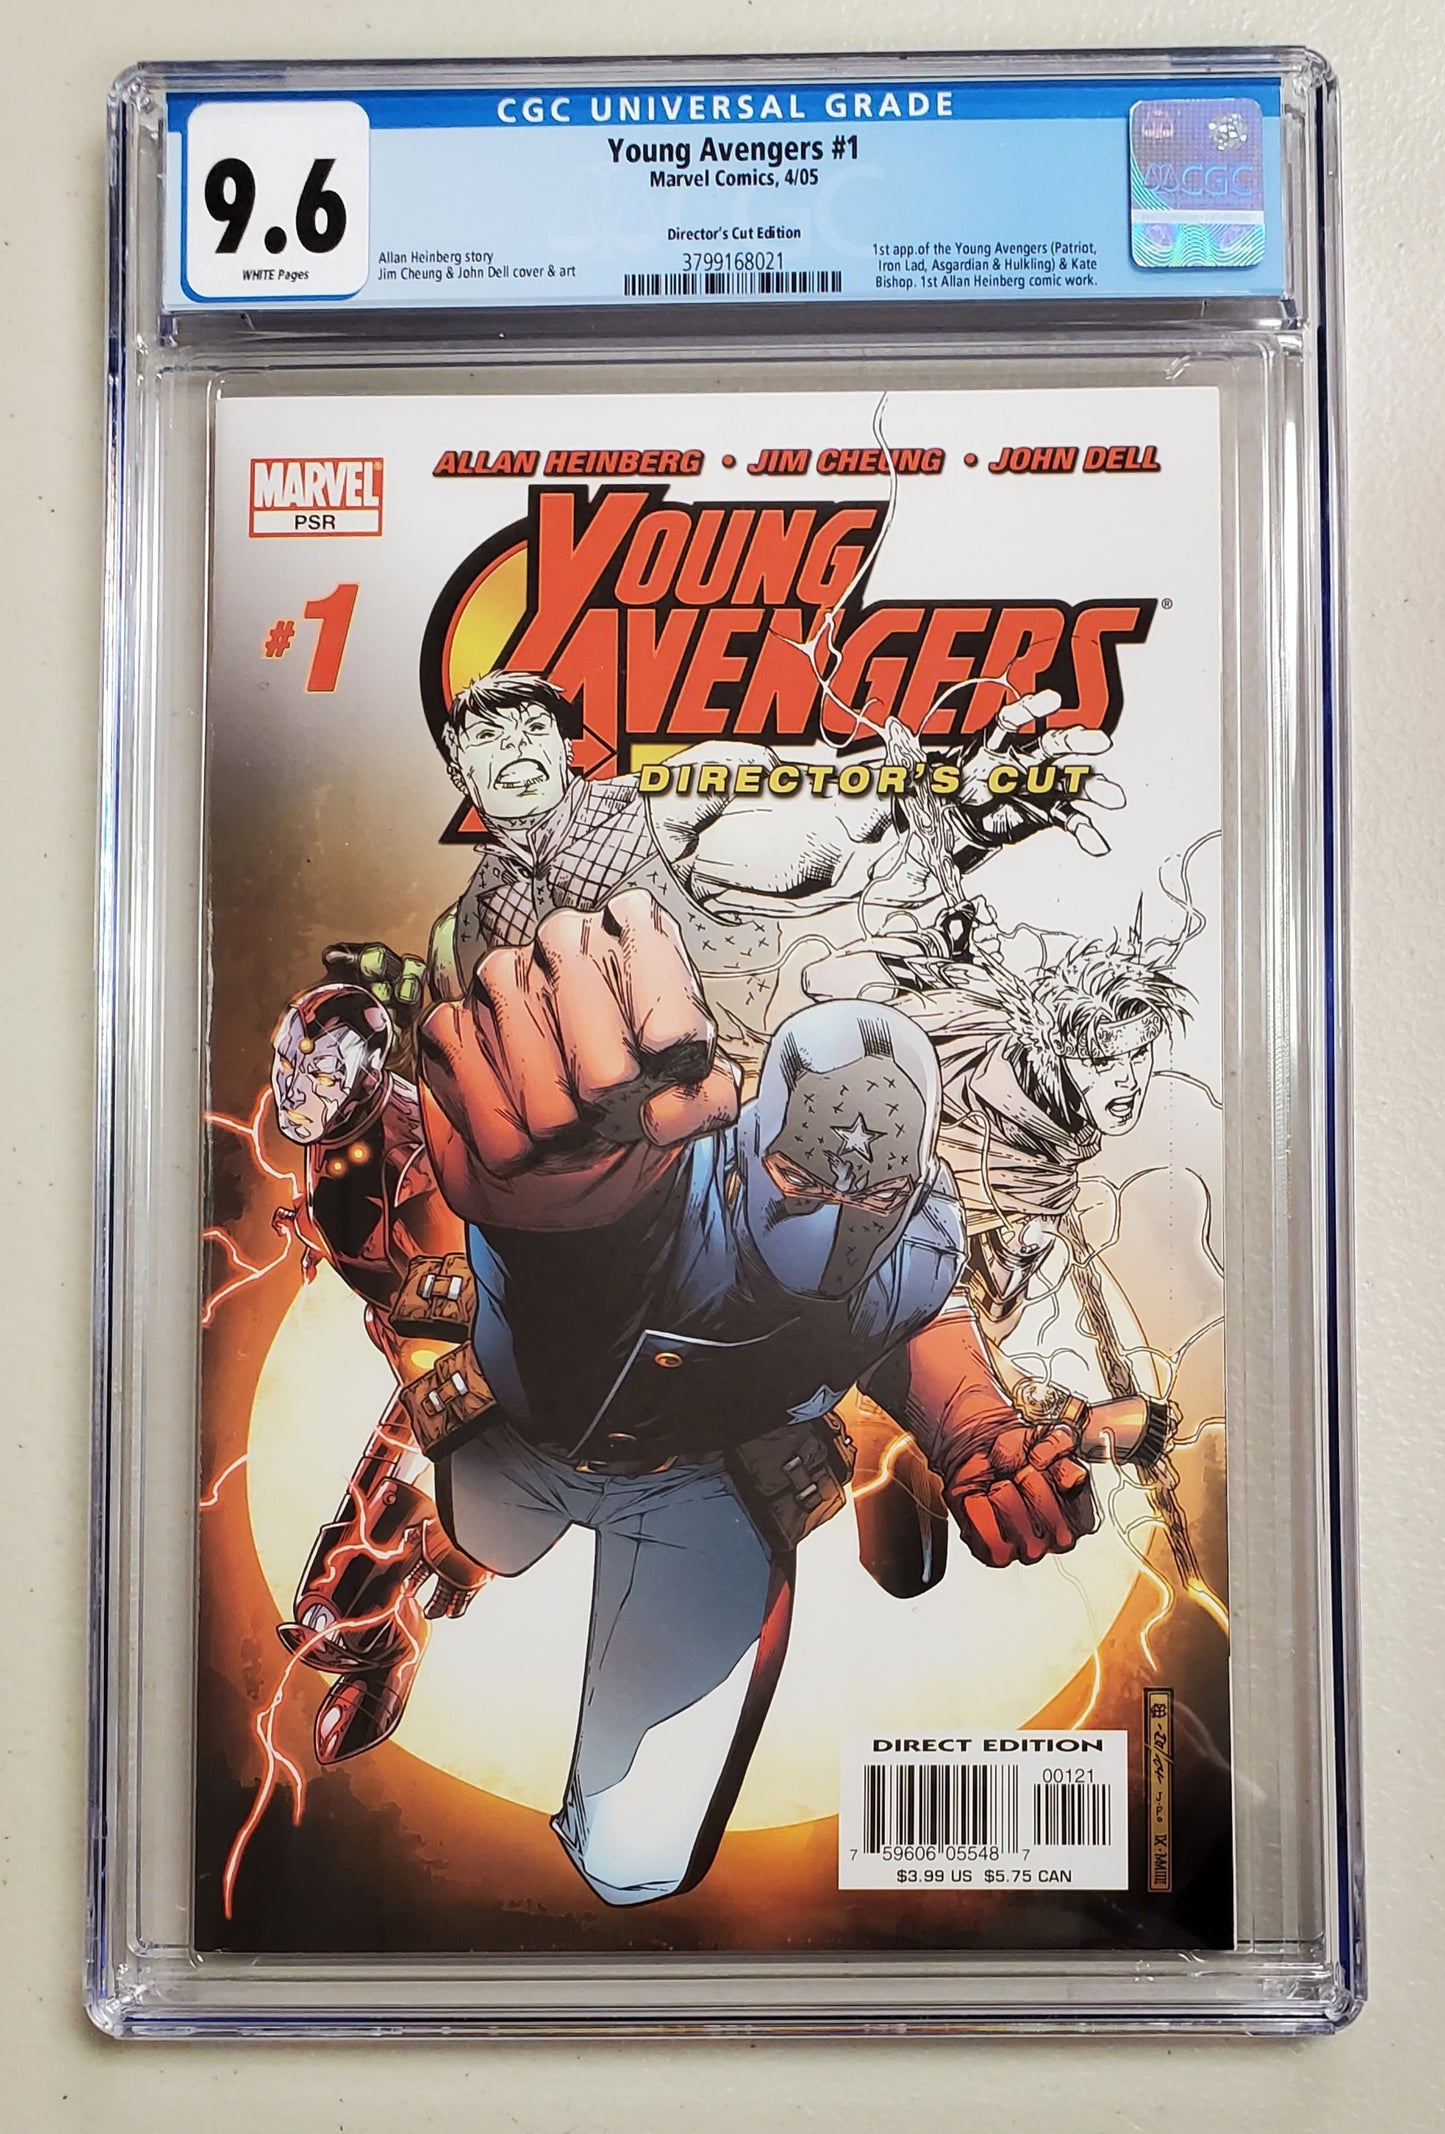 9.6 CGC YOUNG AVENGERS #1 DIRECTOR'S CUT EDITION (1ST APP YOUNG AVENGERS) 2005 [3799168021]